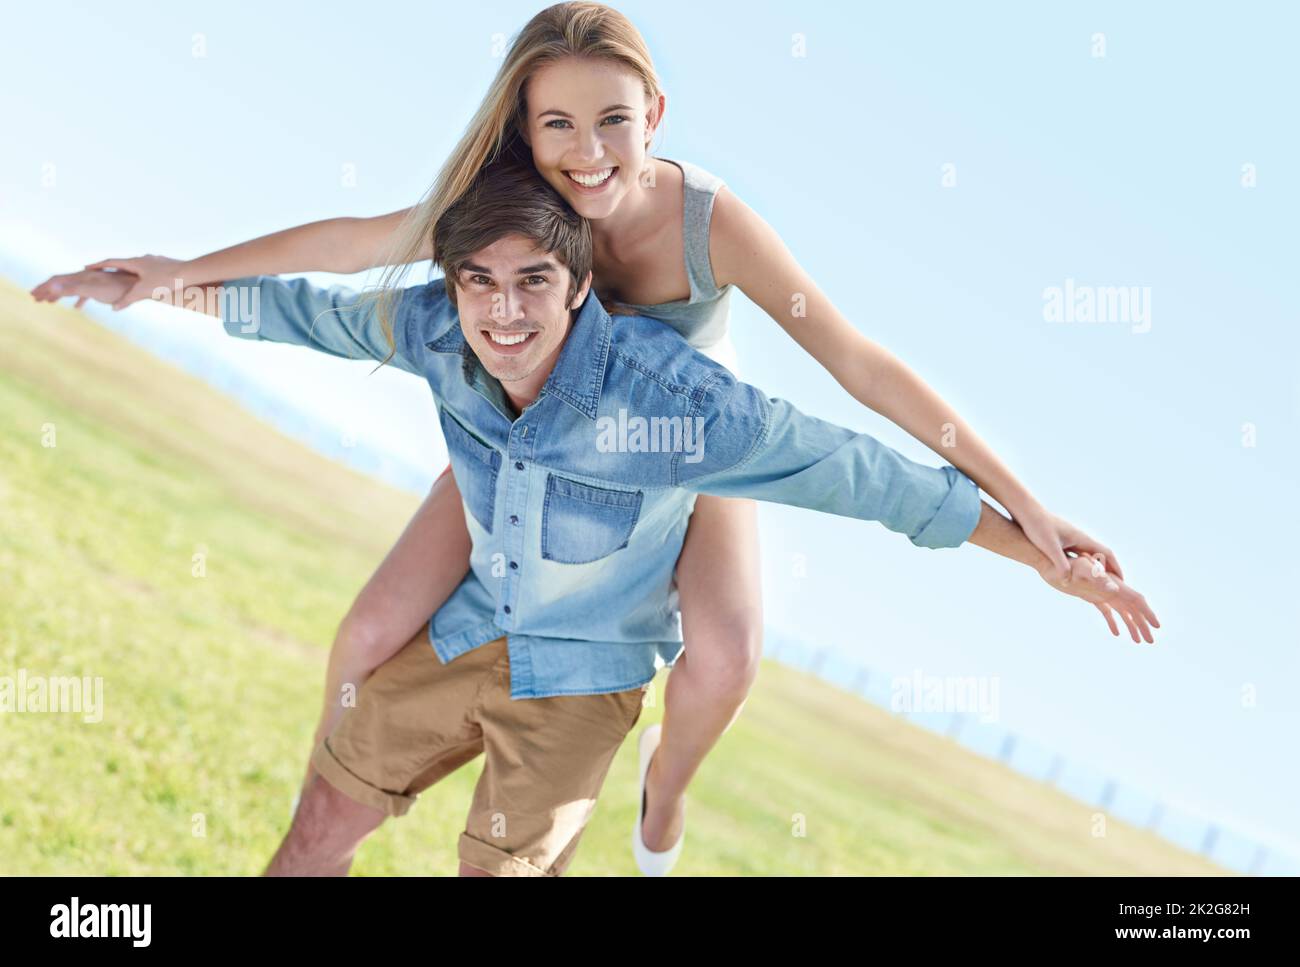 Ahhhhh, young love. A playful young couple enjoying a beautiful day in the outdoors. Stock Photo